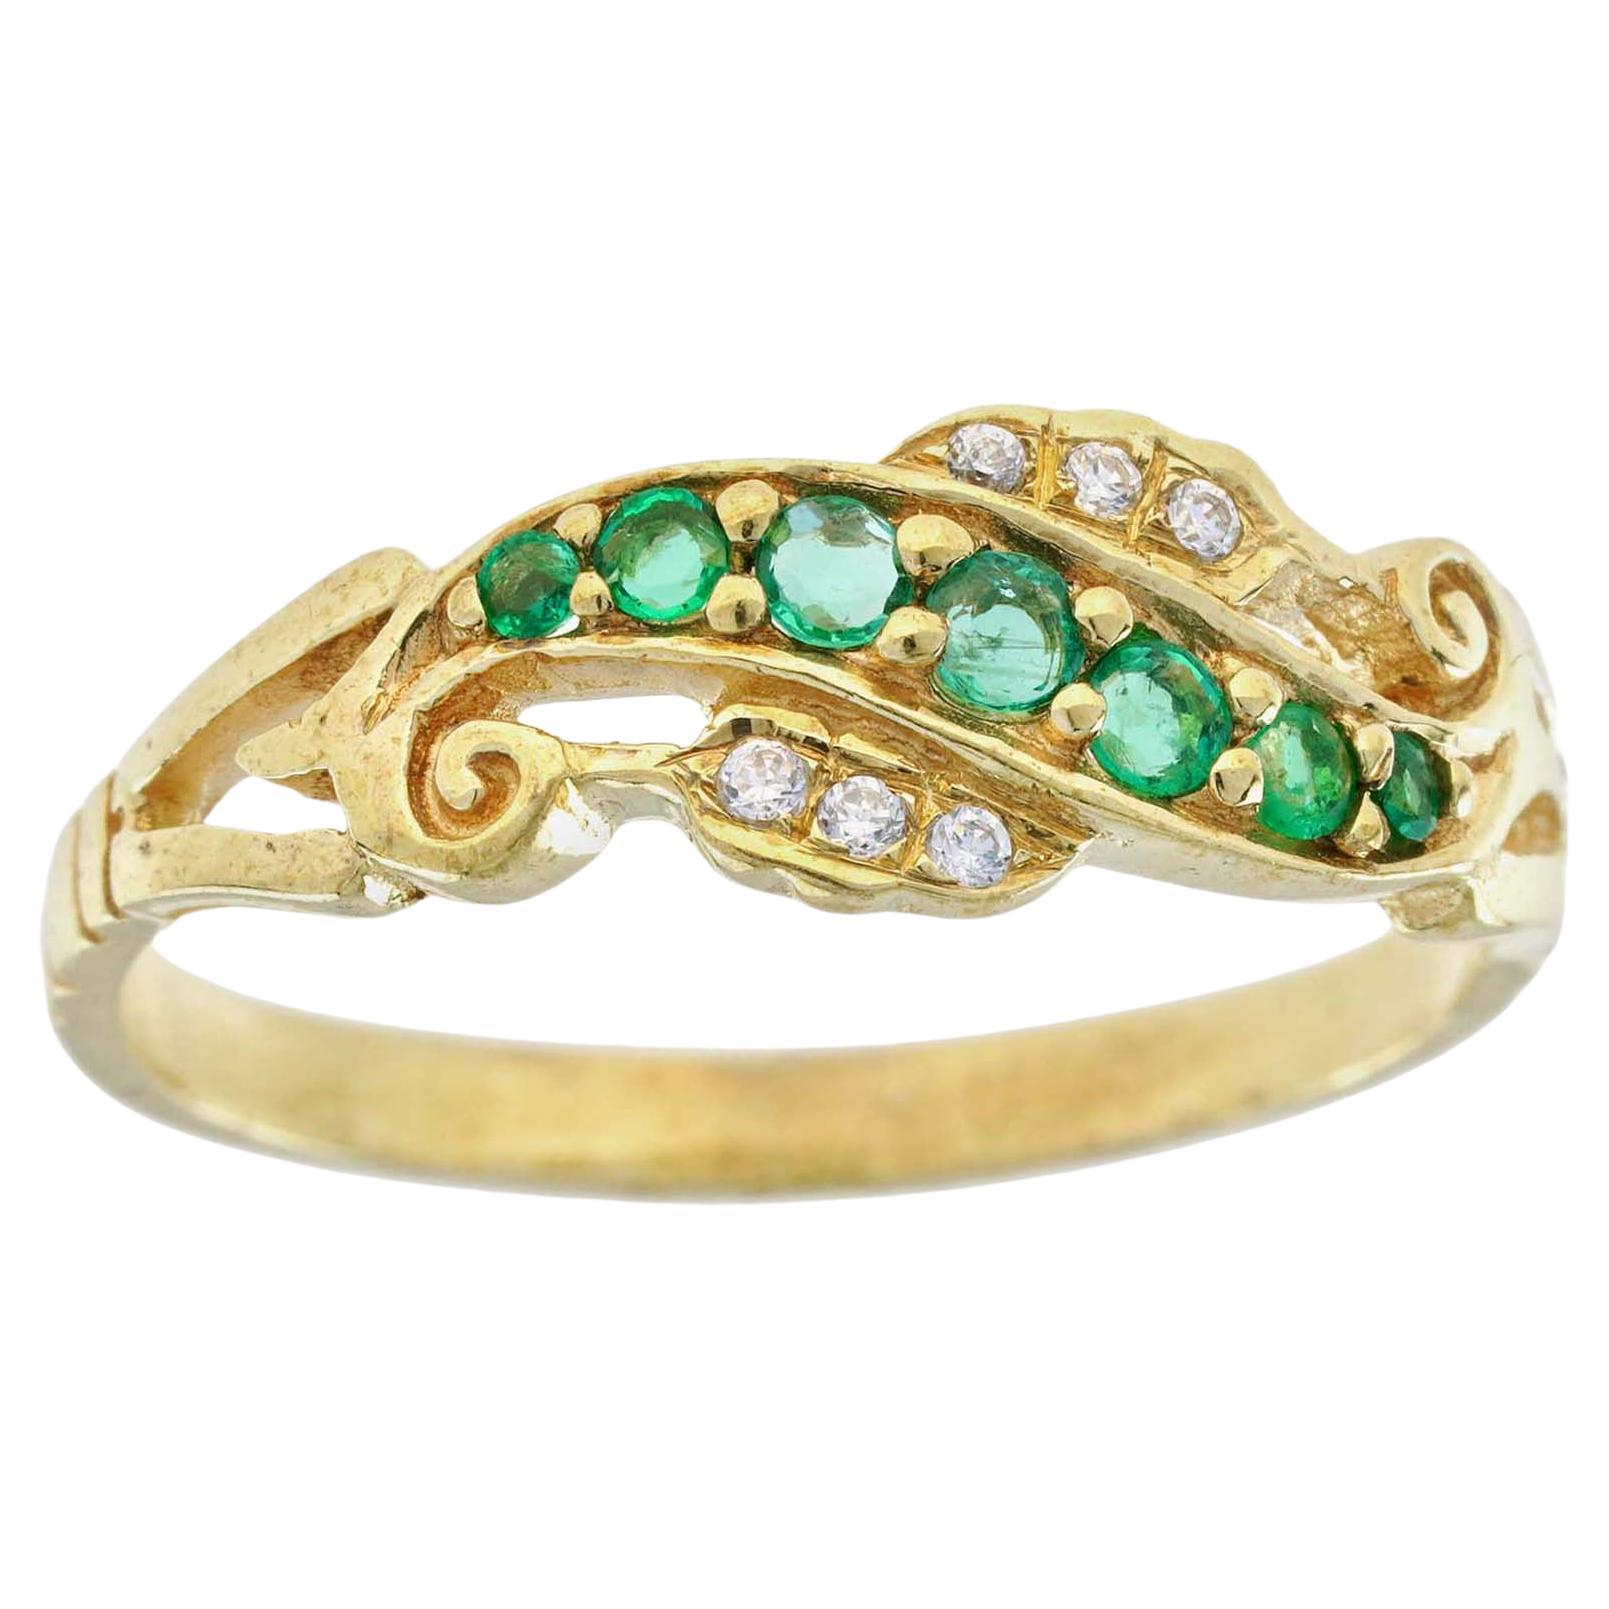 For Sale:  Natural Emerald and Diamond Vintage Style Curve Ring in Solid 9K Yellow Gold